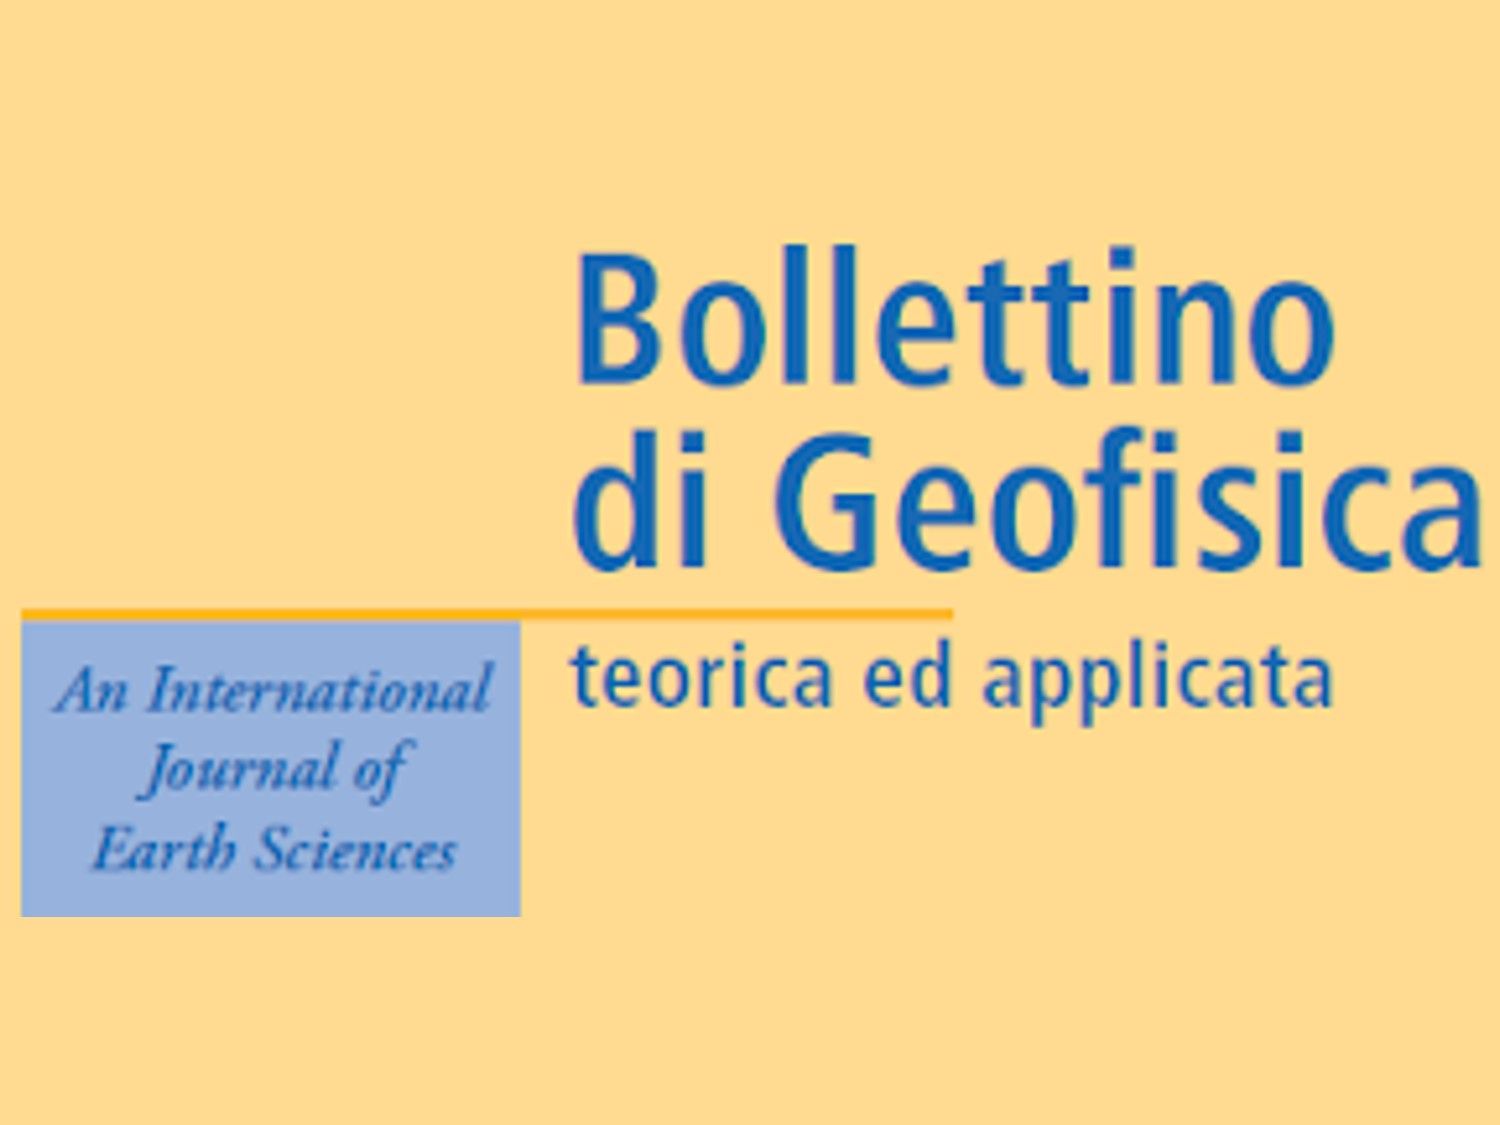 The short-term countermeasures system of the Italian national fire service for post-earthquake response